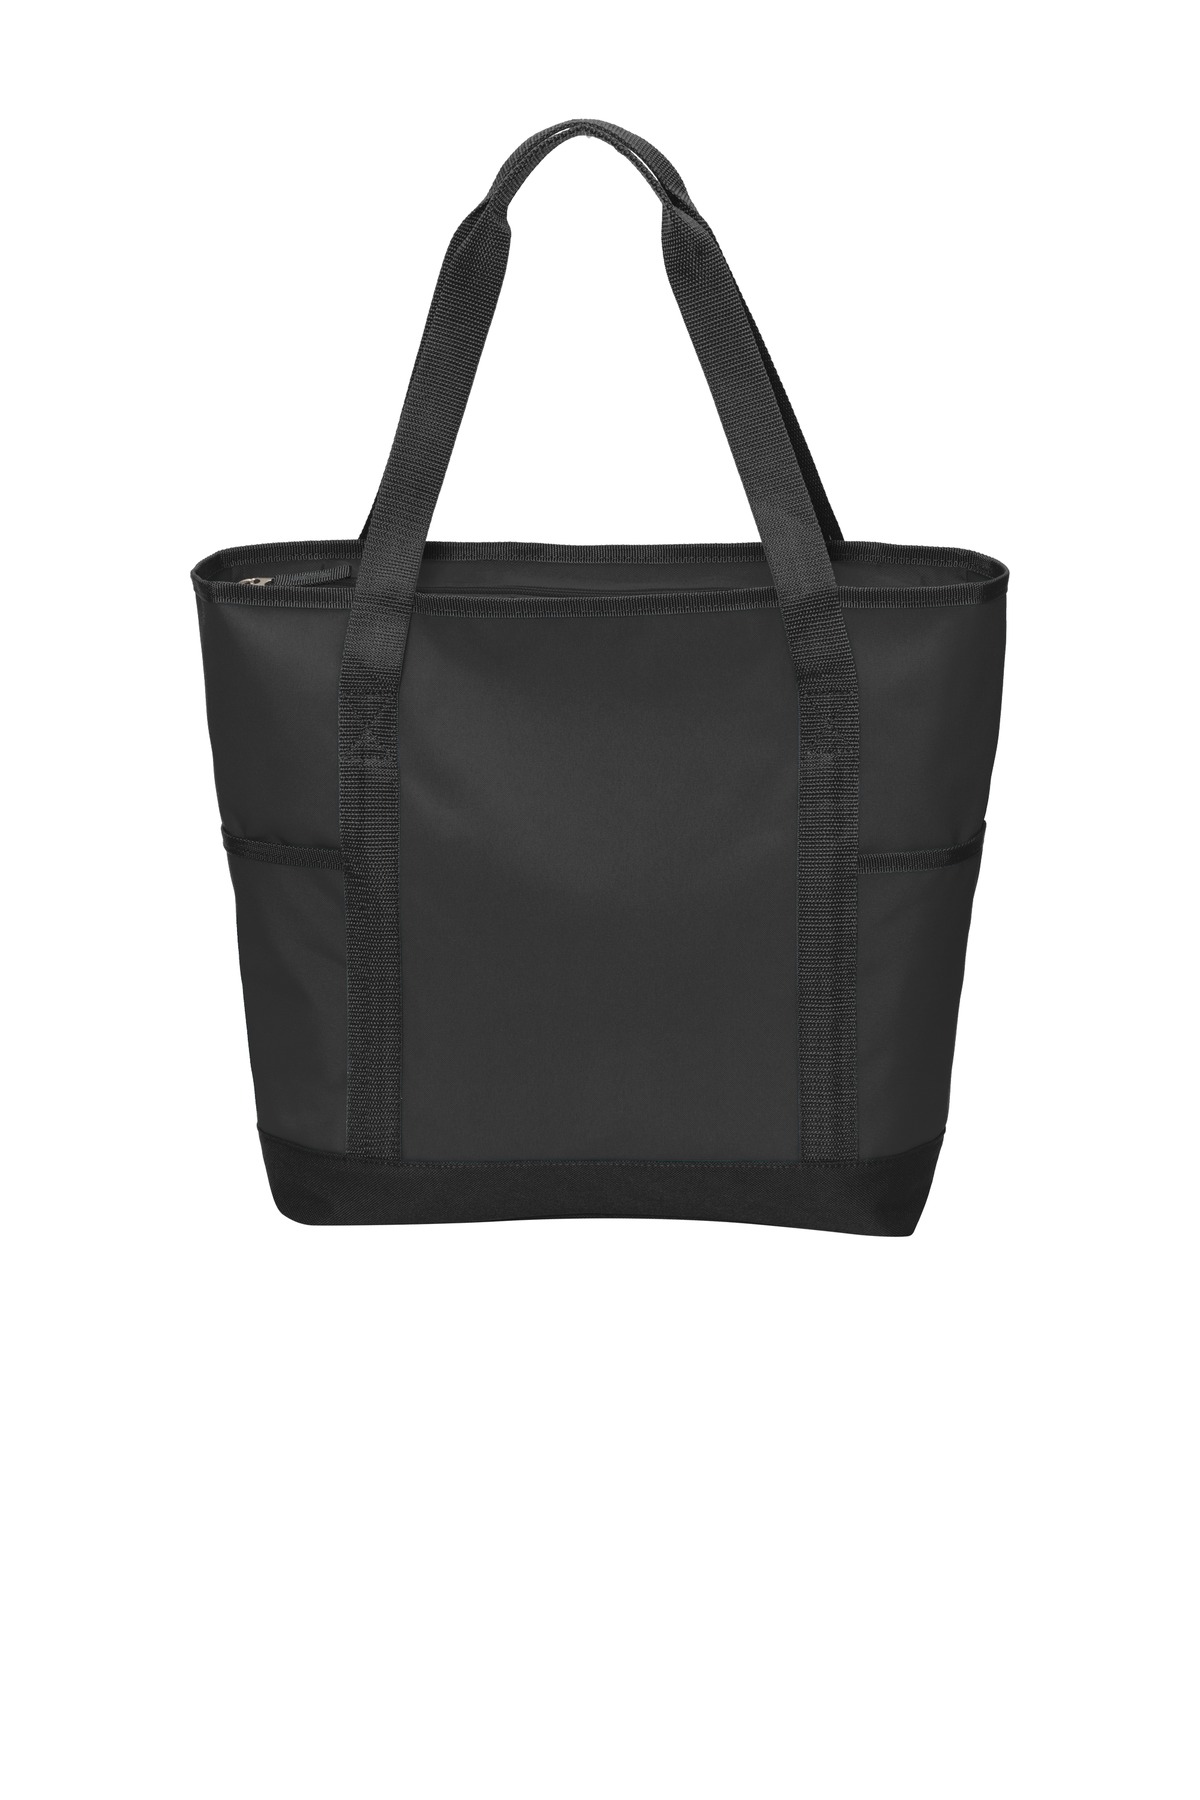 Port Authority Hospitality Bags ® On-The-Go Tote.-Port Authority